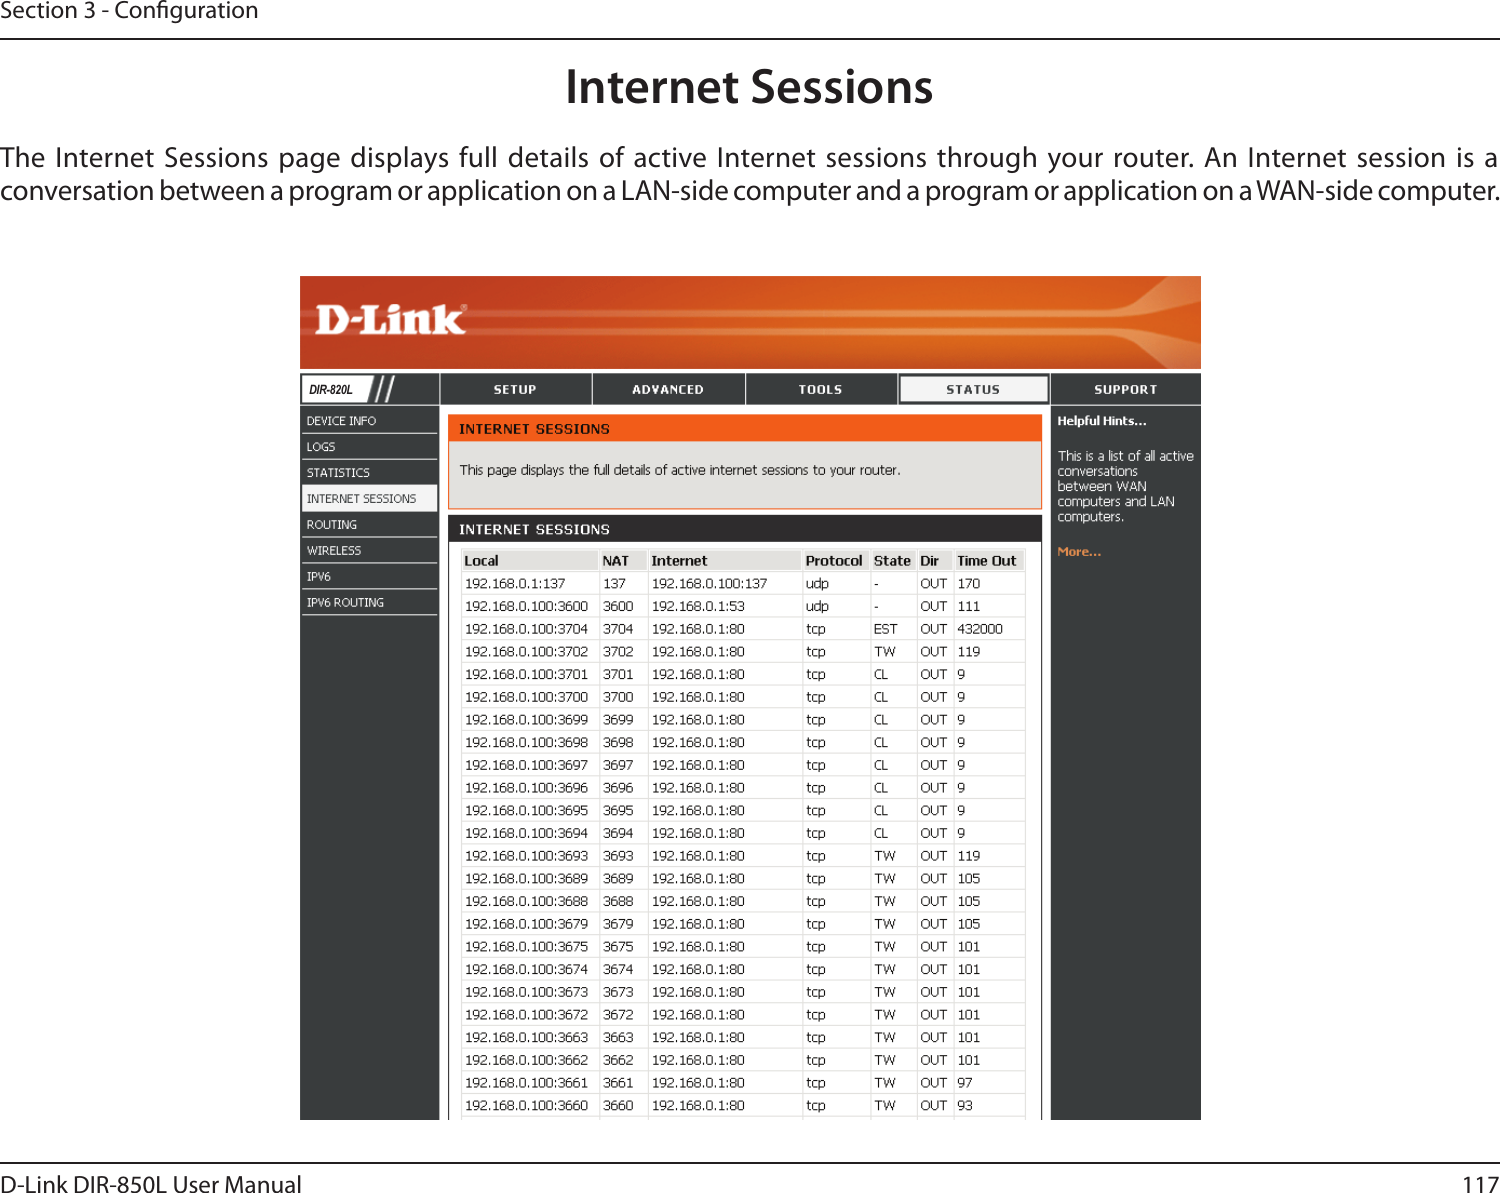 117D-Link DIR-850L User ManualSection 3 - CongurationInternet SessionsThe Internet Sessions page displays full details of active Internet sessions through your router. An Internet session is a conversation between a program or application on a LAN-side computer and a program or application on a WAN-side computer. DIR-820L